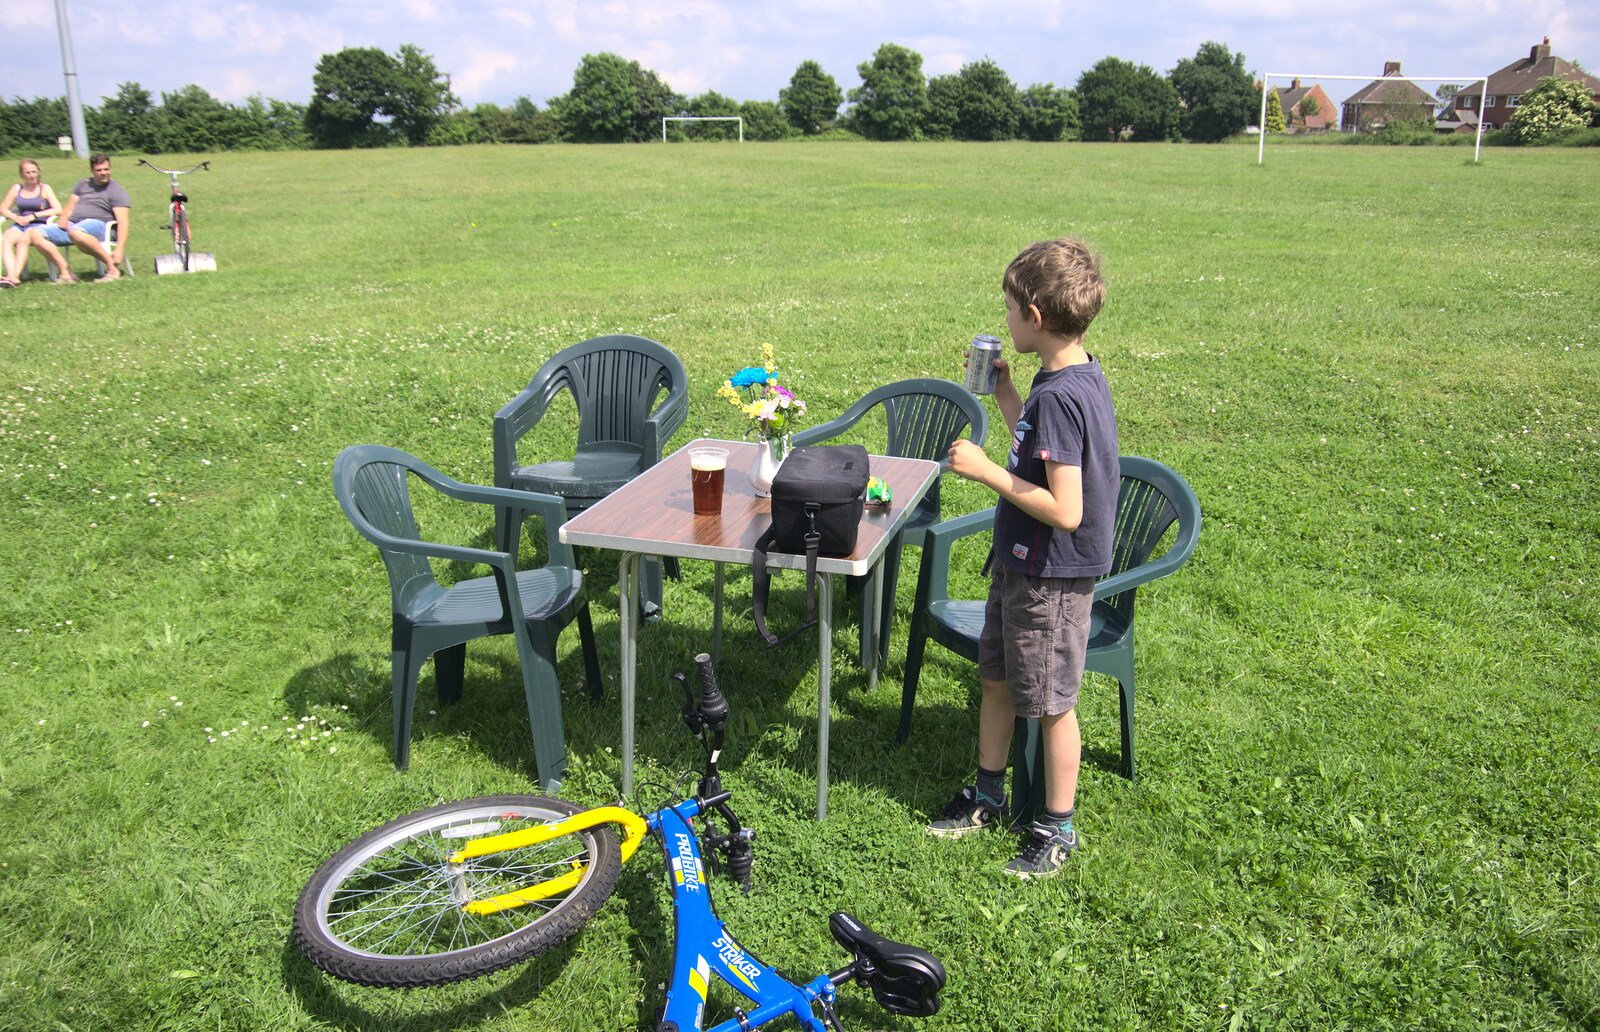 Fred has a diet coke from The Not-Opening of the Palgrave Playground, Palgrave, Suffolk - 3rd June 2018